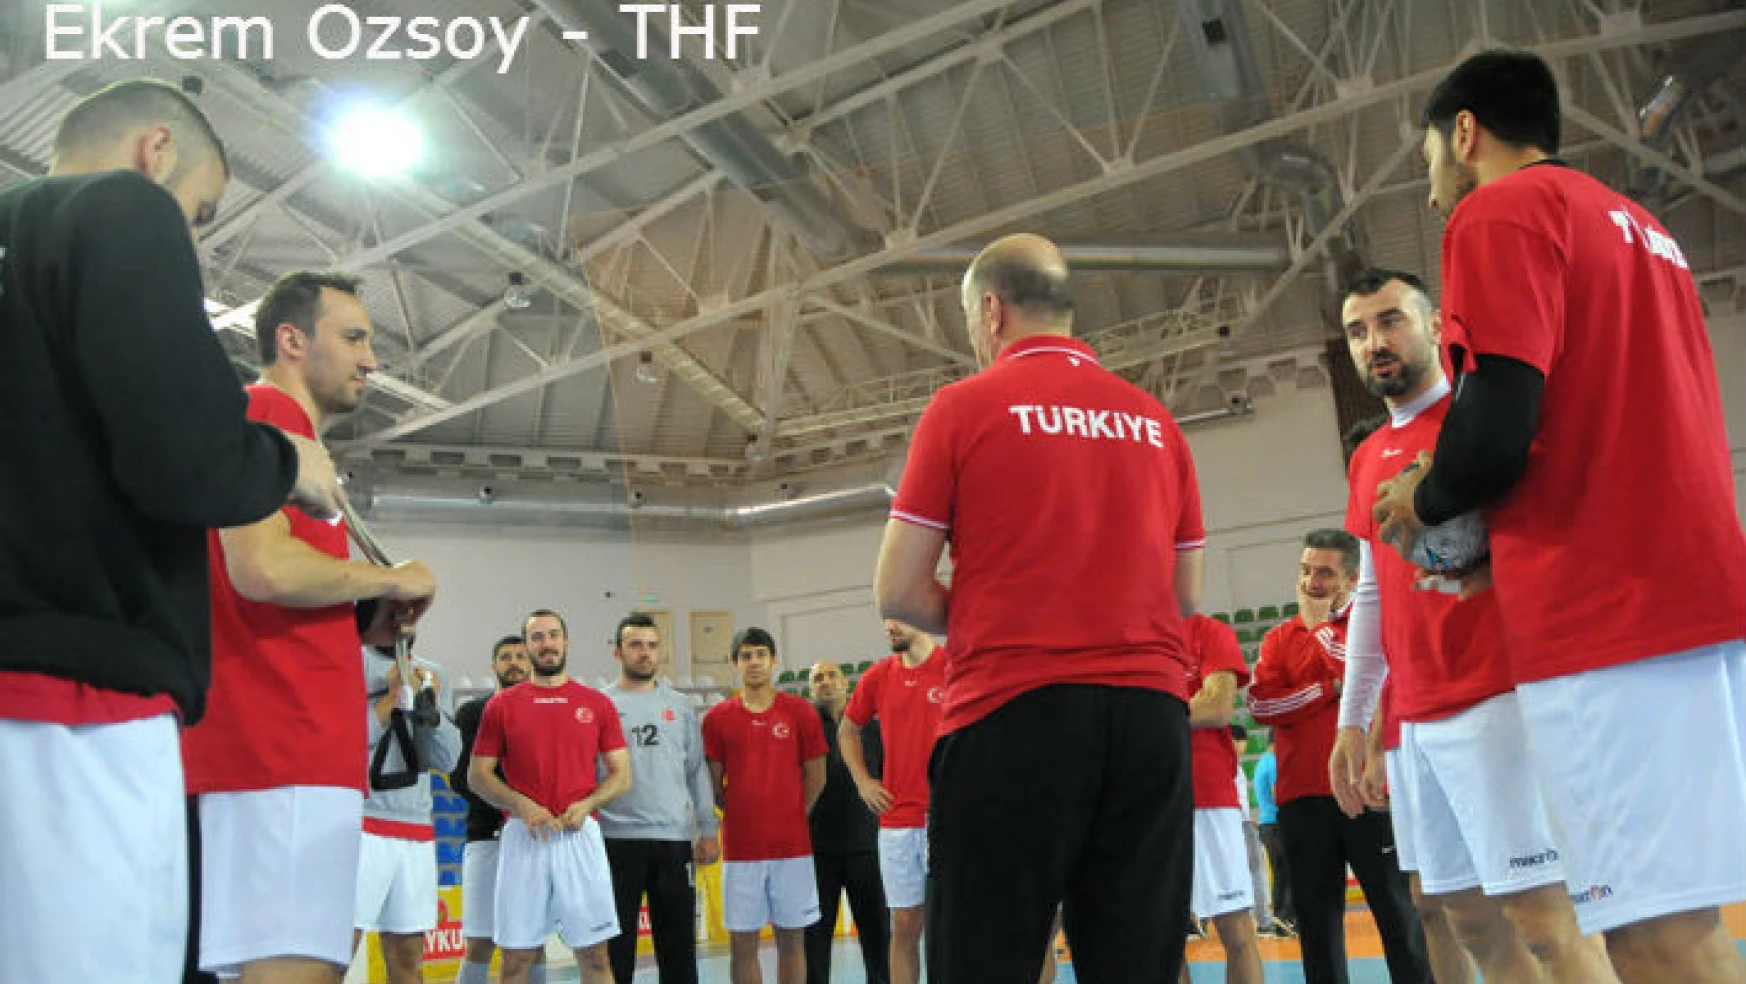 Turkey signs 'It’s now or never' As they enter EHF EURO 2020 Qualification